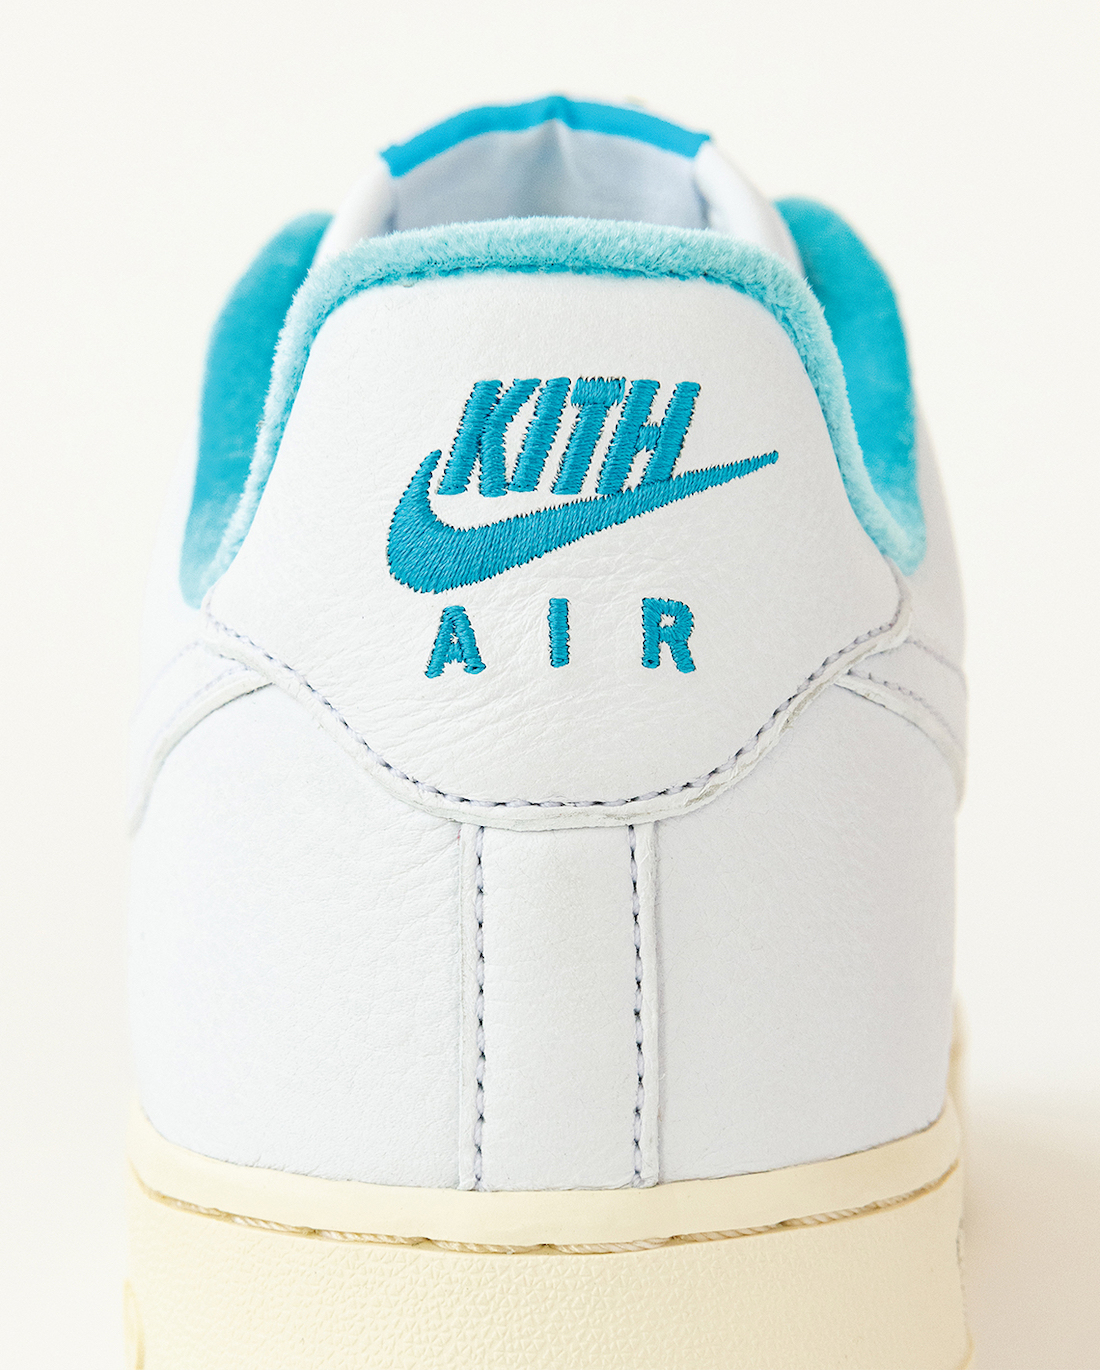 Kith Nike Air Force 1 Low Hawaii DC9555 100 Release Date Price 6